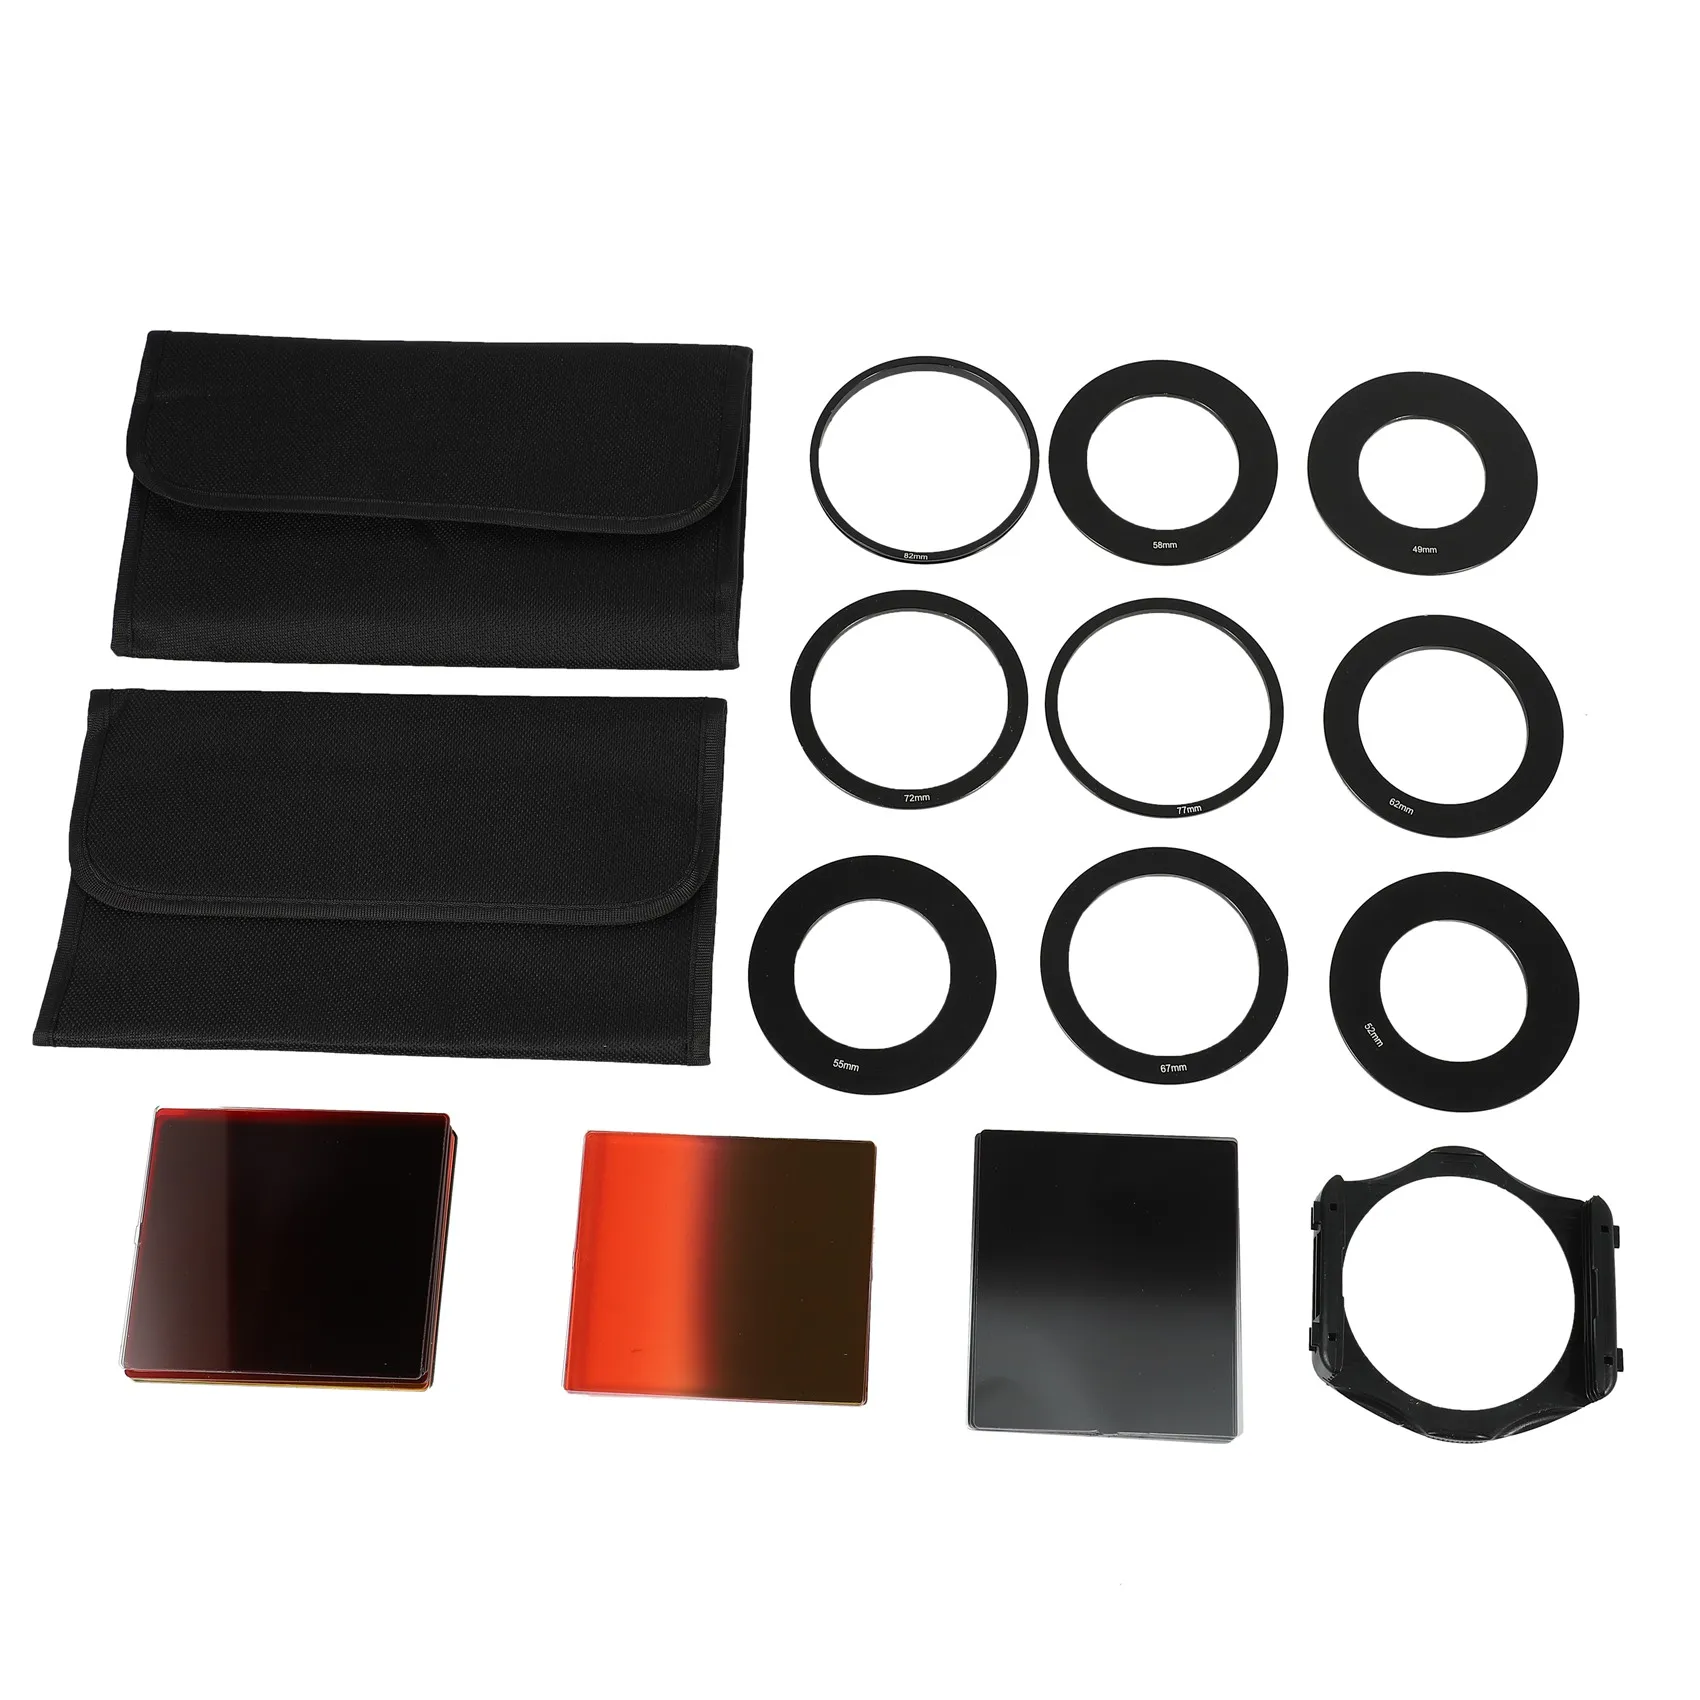 

24pcs Square Full + Graduated Filter Set + 9 Size Adapter Ring Filter Holder for cokin p series LF78